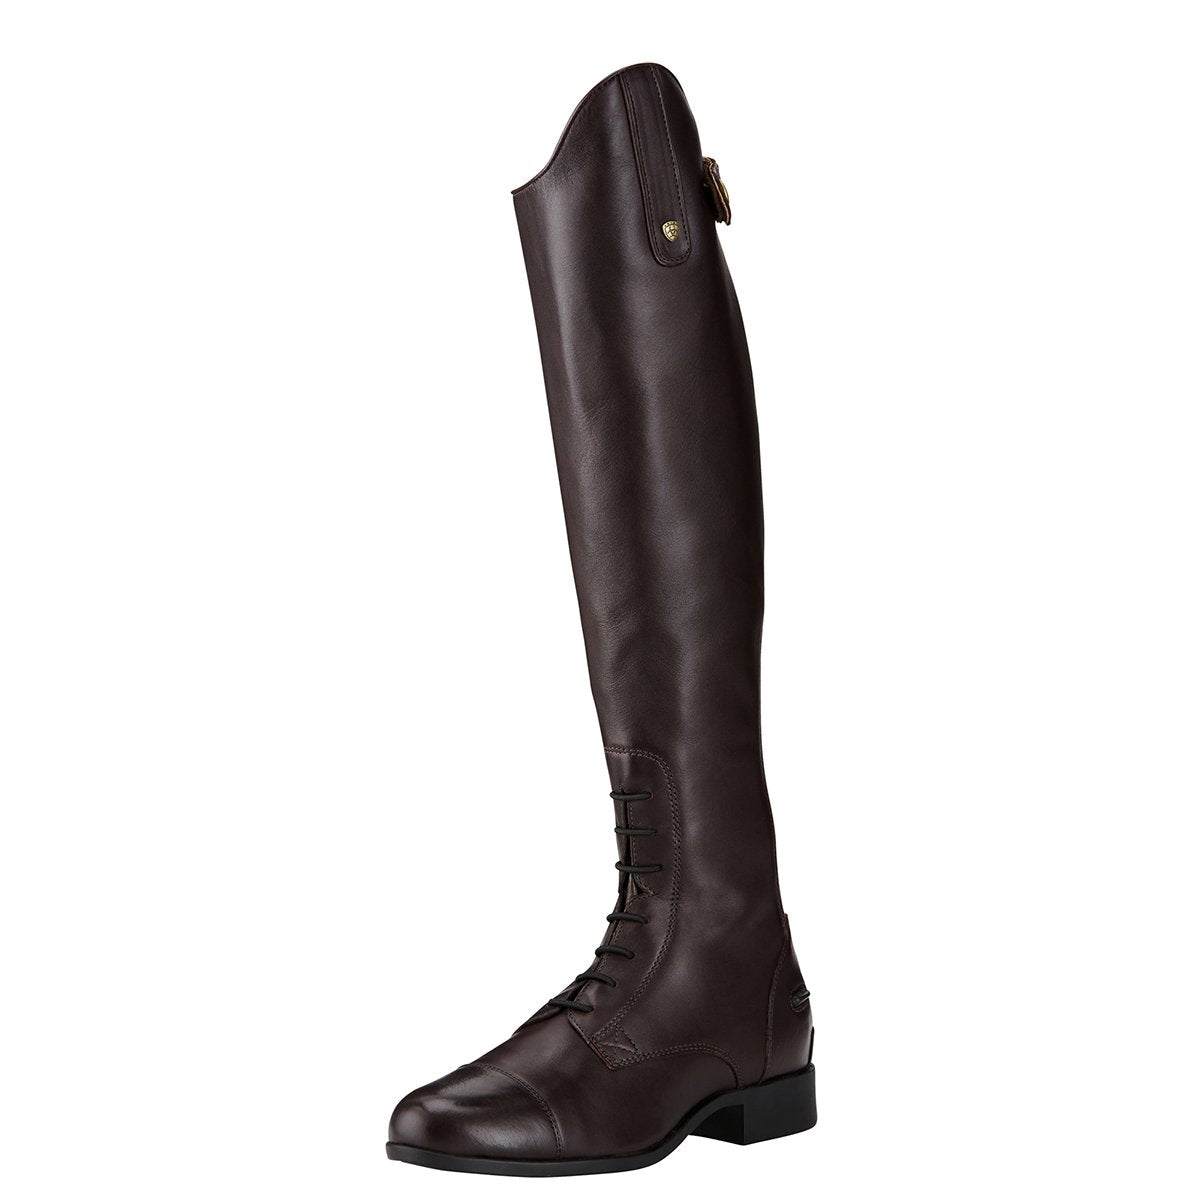 Women's Ariat Heritage Contour II Field Zip Tall Riding Boot in Sienna from the front